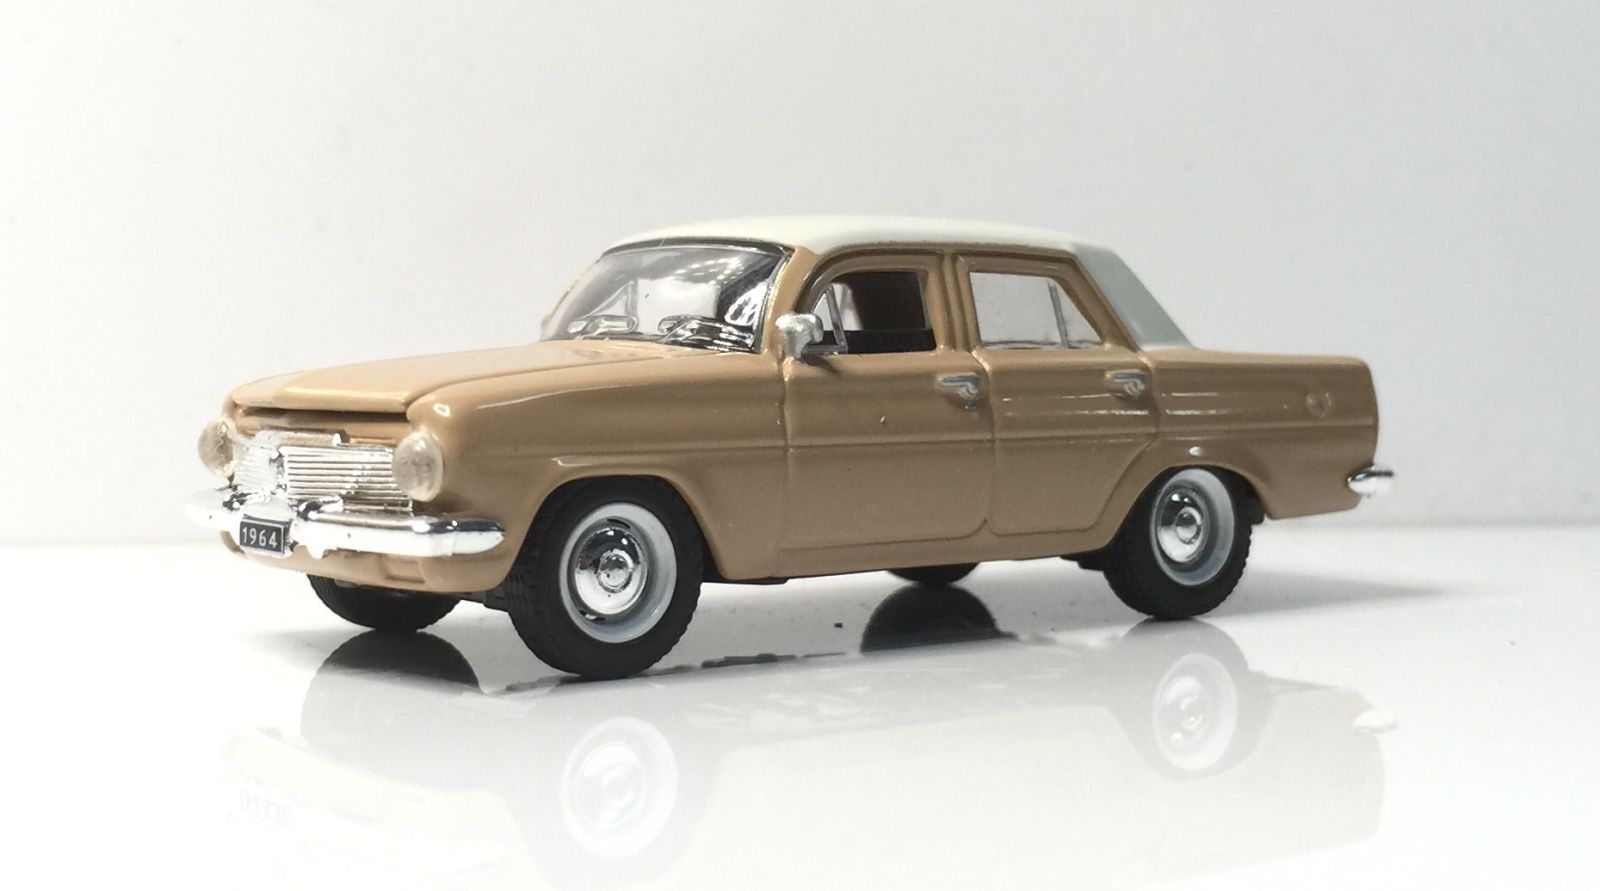 Illustration for article titled 1964 EH Holden in 1:64